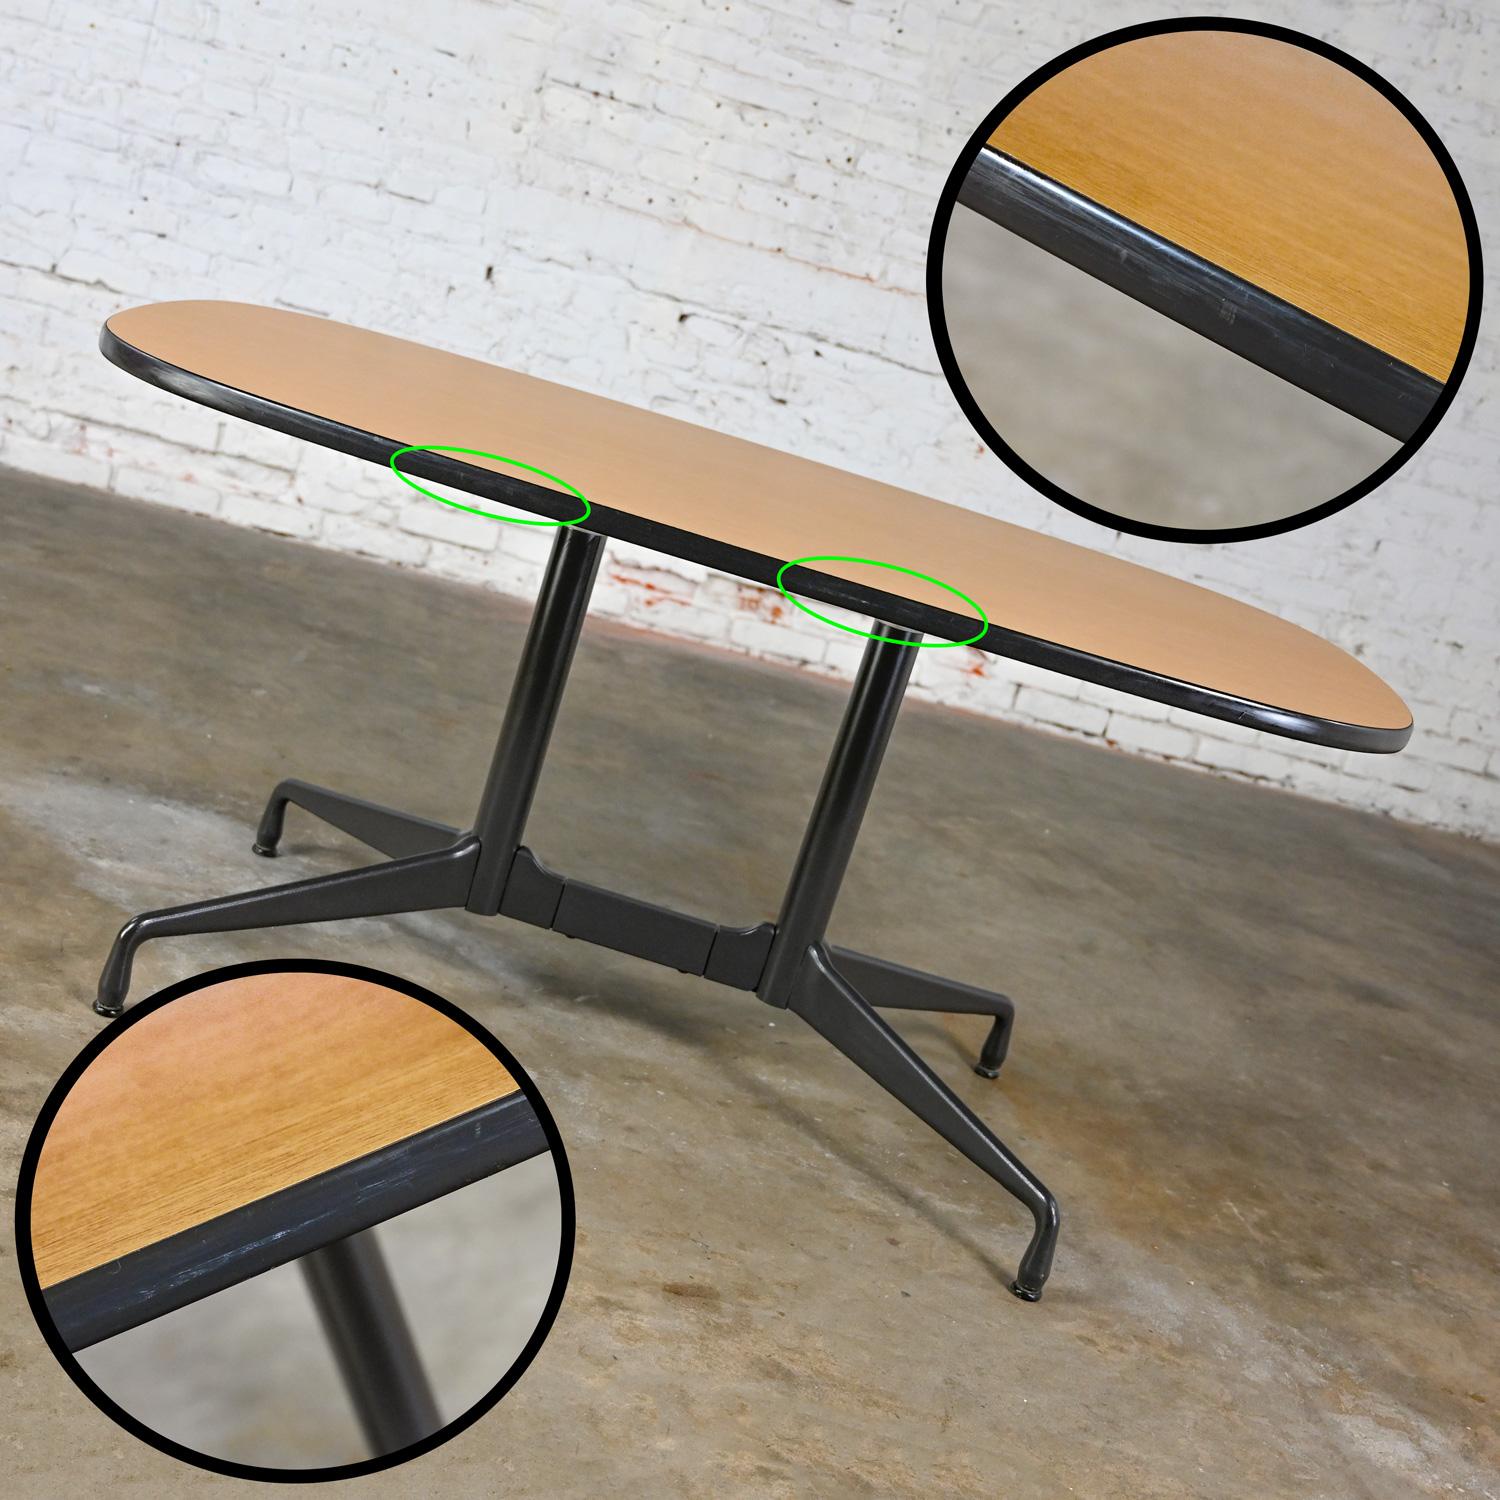 Eames Herman Miller Oval Conference Dining Table Universal Segmented Laminate #2 In Good Condition For Sale In Topeka, KS